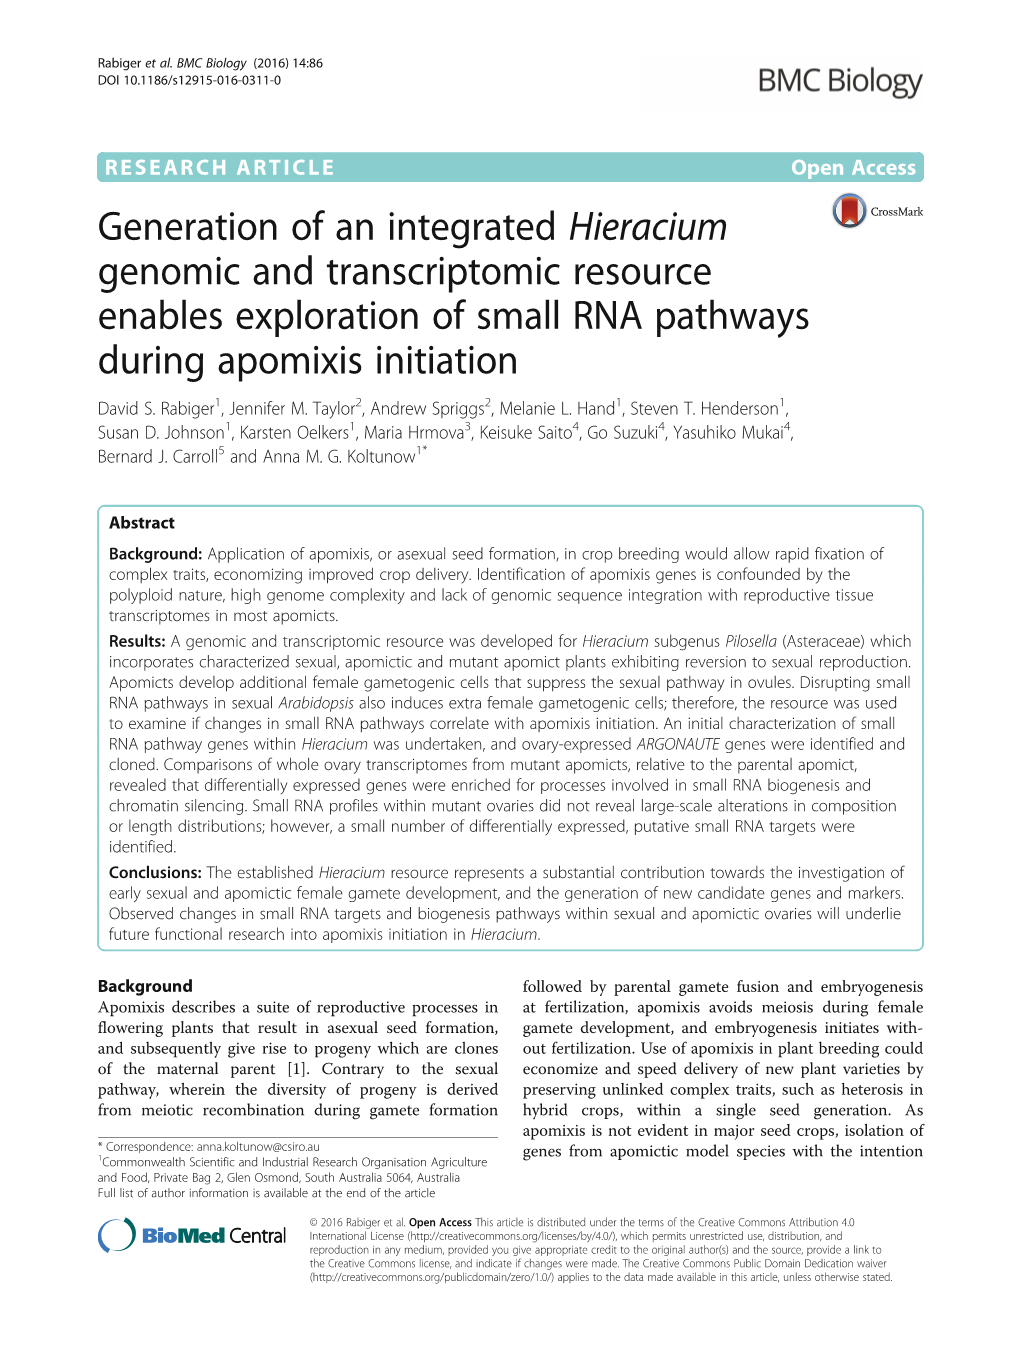 Generation of an Integrated Hieracium Genomic and Transcriptomic Resource Enables Exploration of Small RNA Pathways During Apomixis Initiation David S